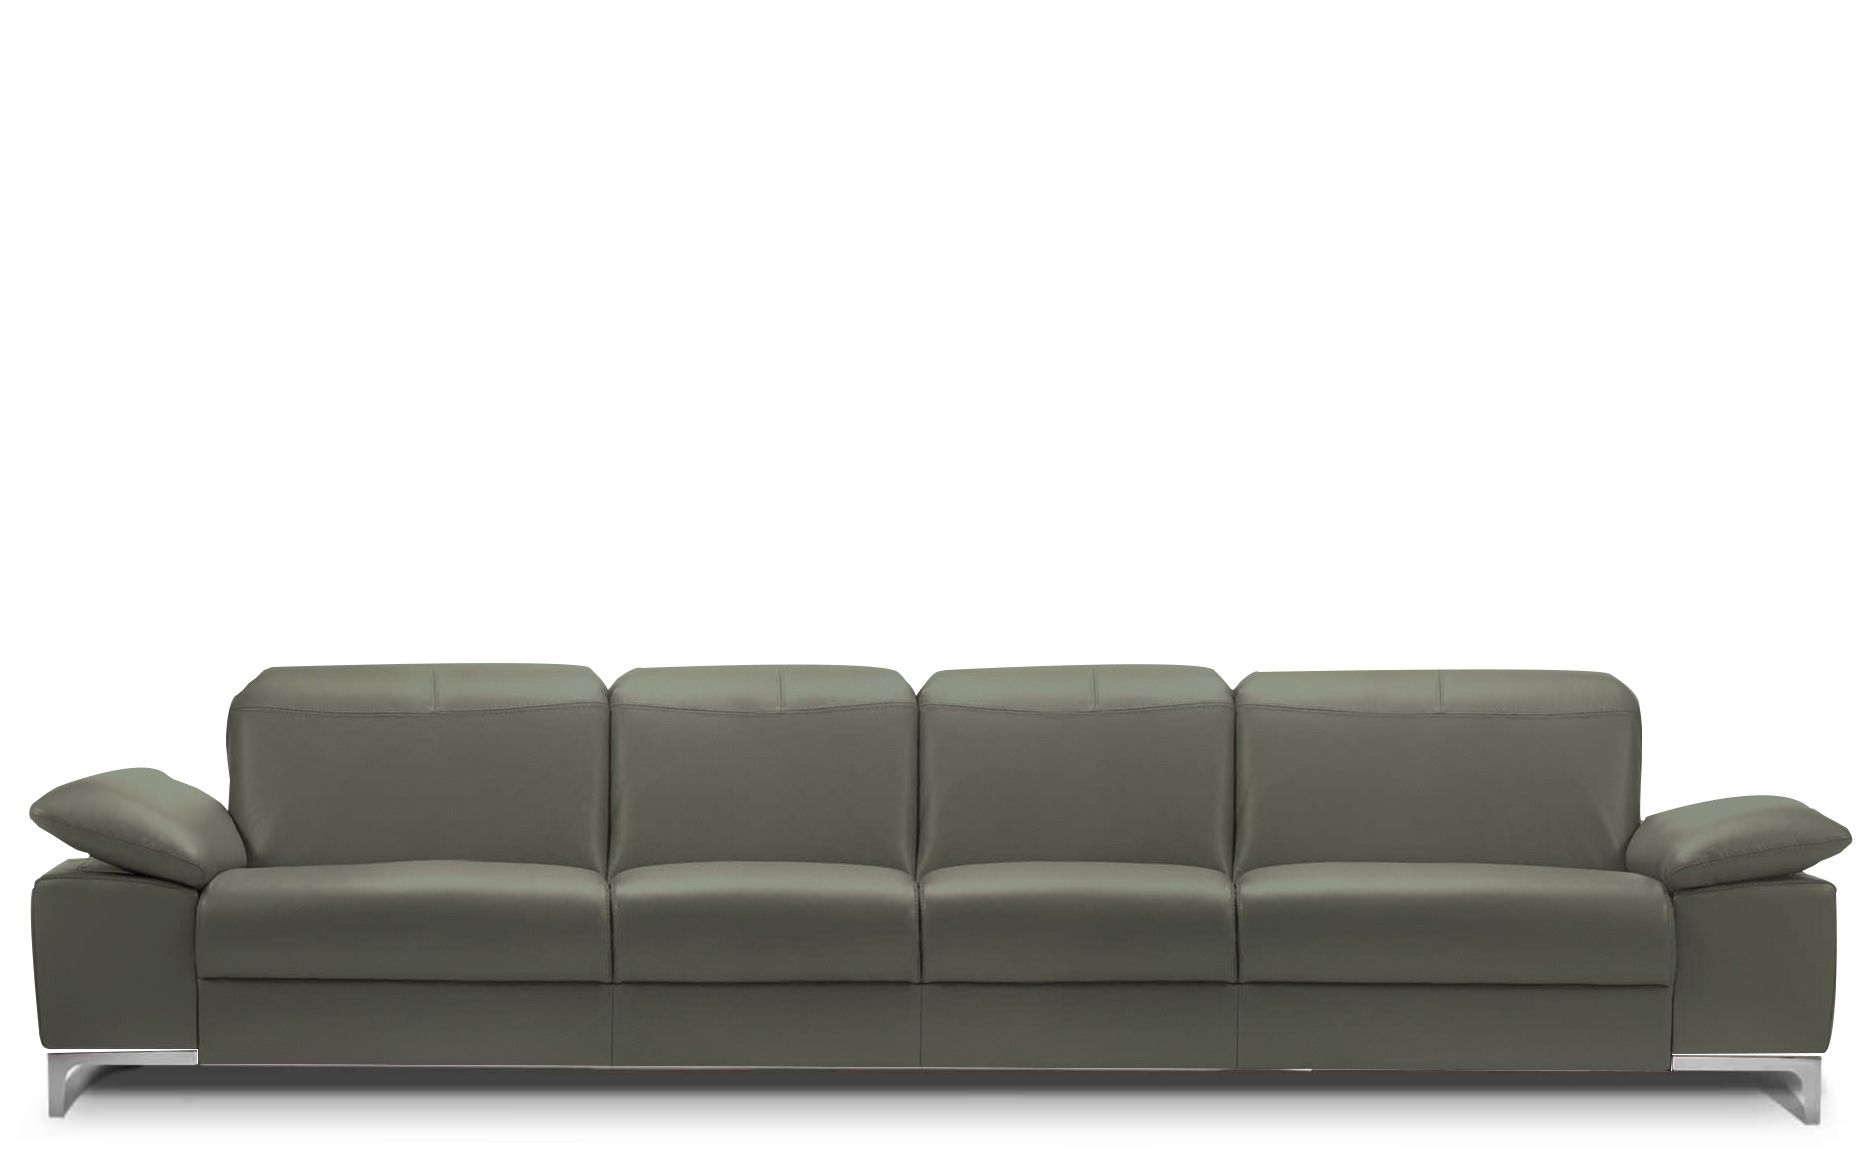 4 Seater Leather Sofas 33 With 4 Seater Leather Sofas With Regard To 4 Seat Leather Sofas (View 4 of 15)